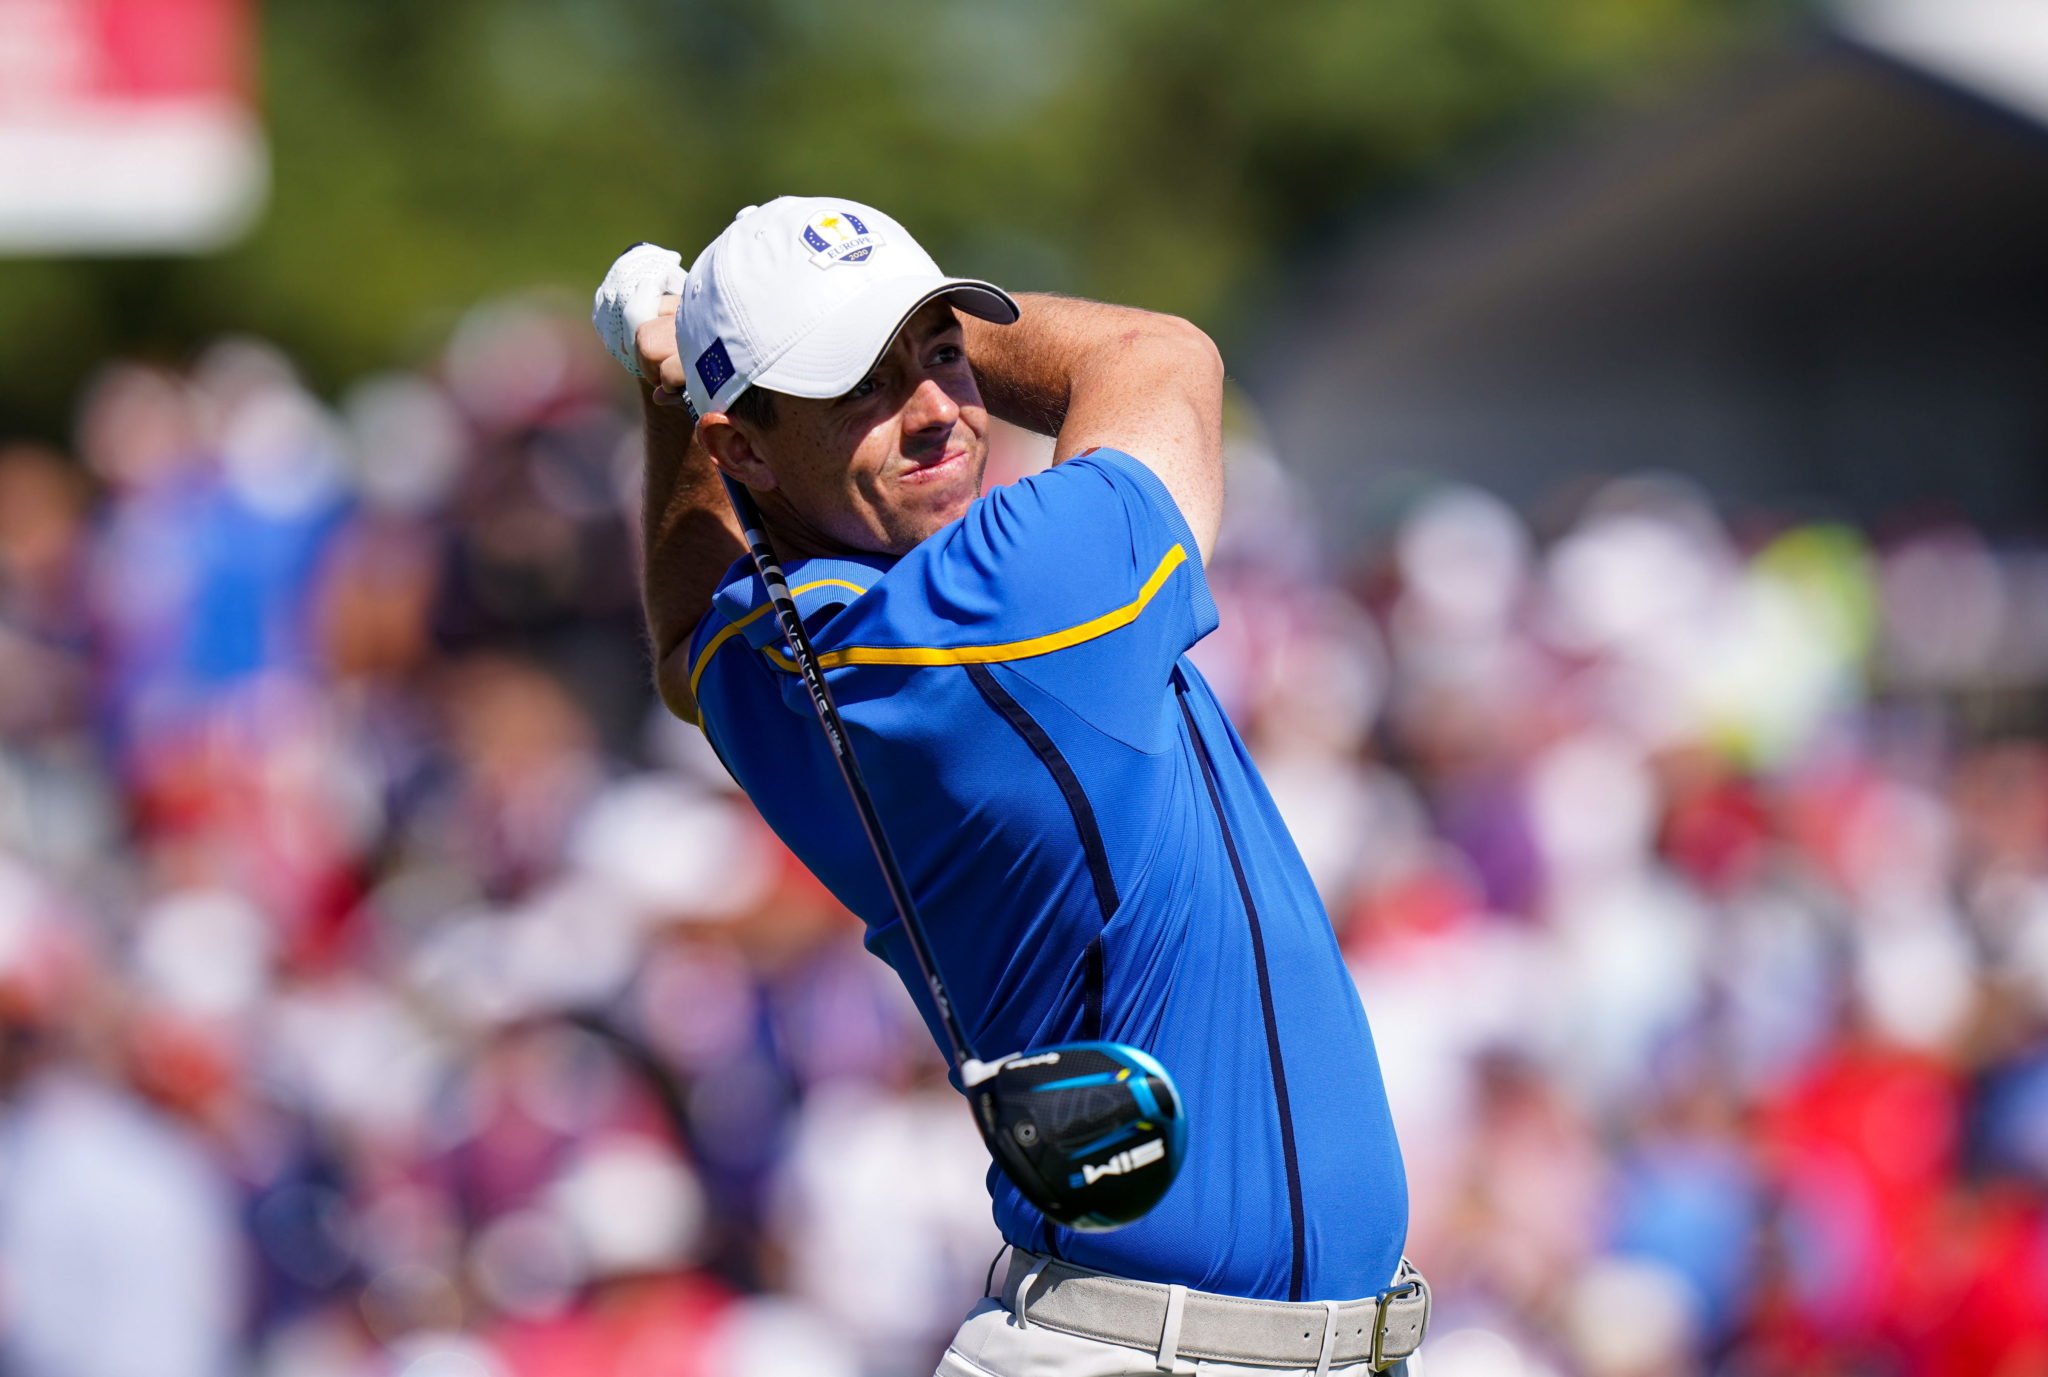 Team Europe’s Rory McIlroy at the Ryder Cup 2021 at Whistling Straits in Kohler, Wisconsin, USA